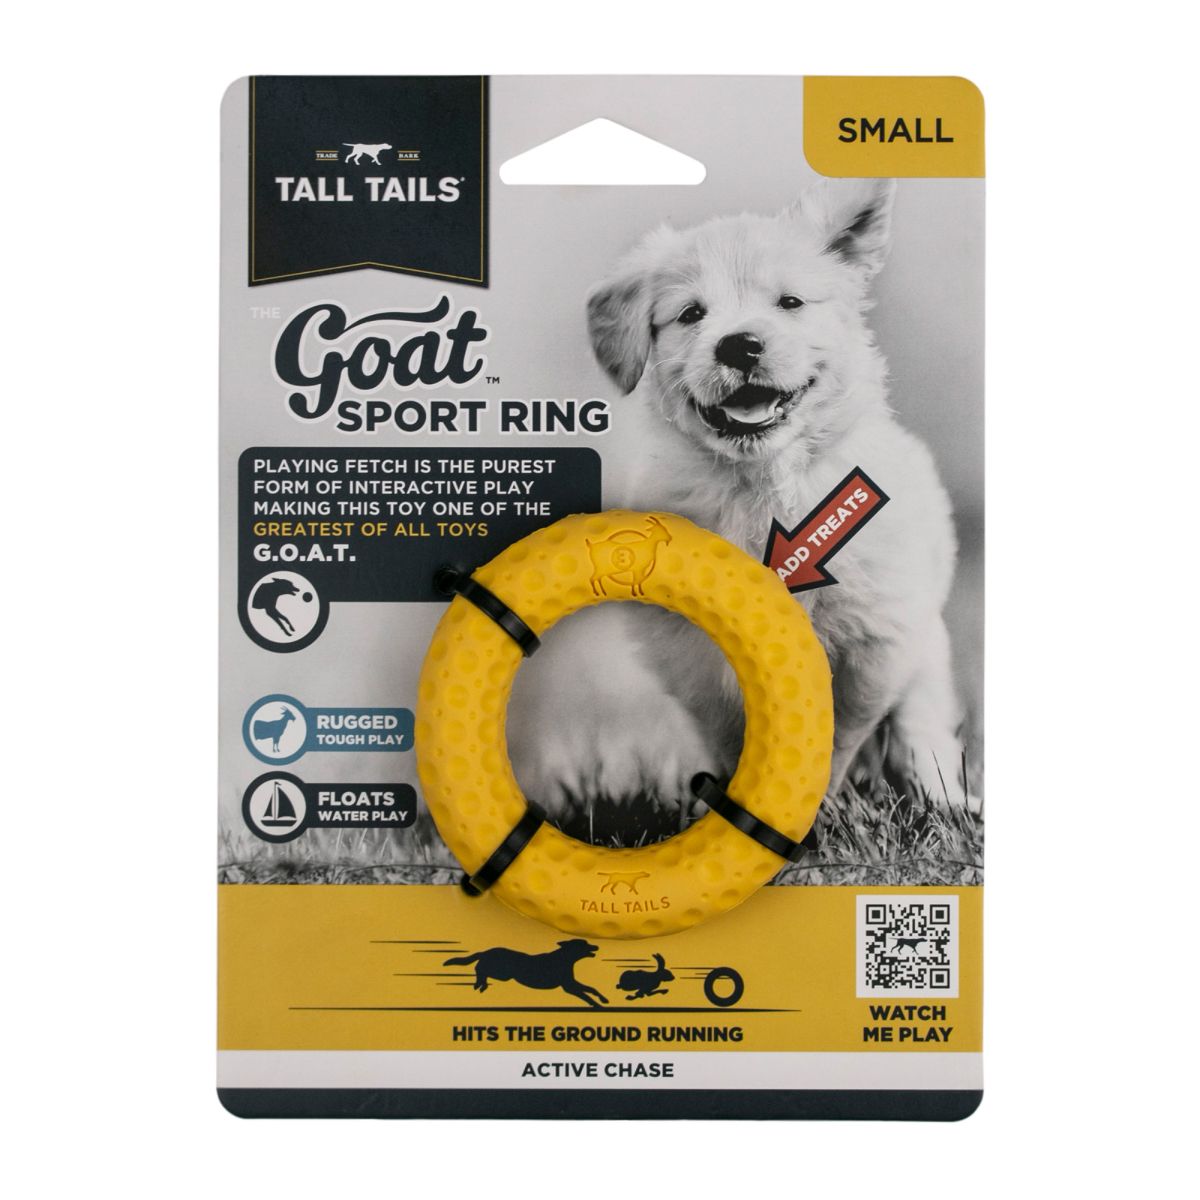 Tall Tails GOAT Sport Ring